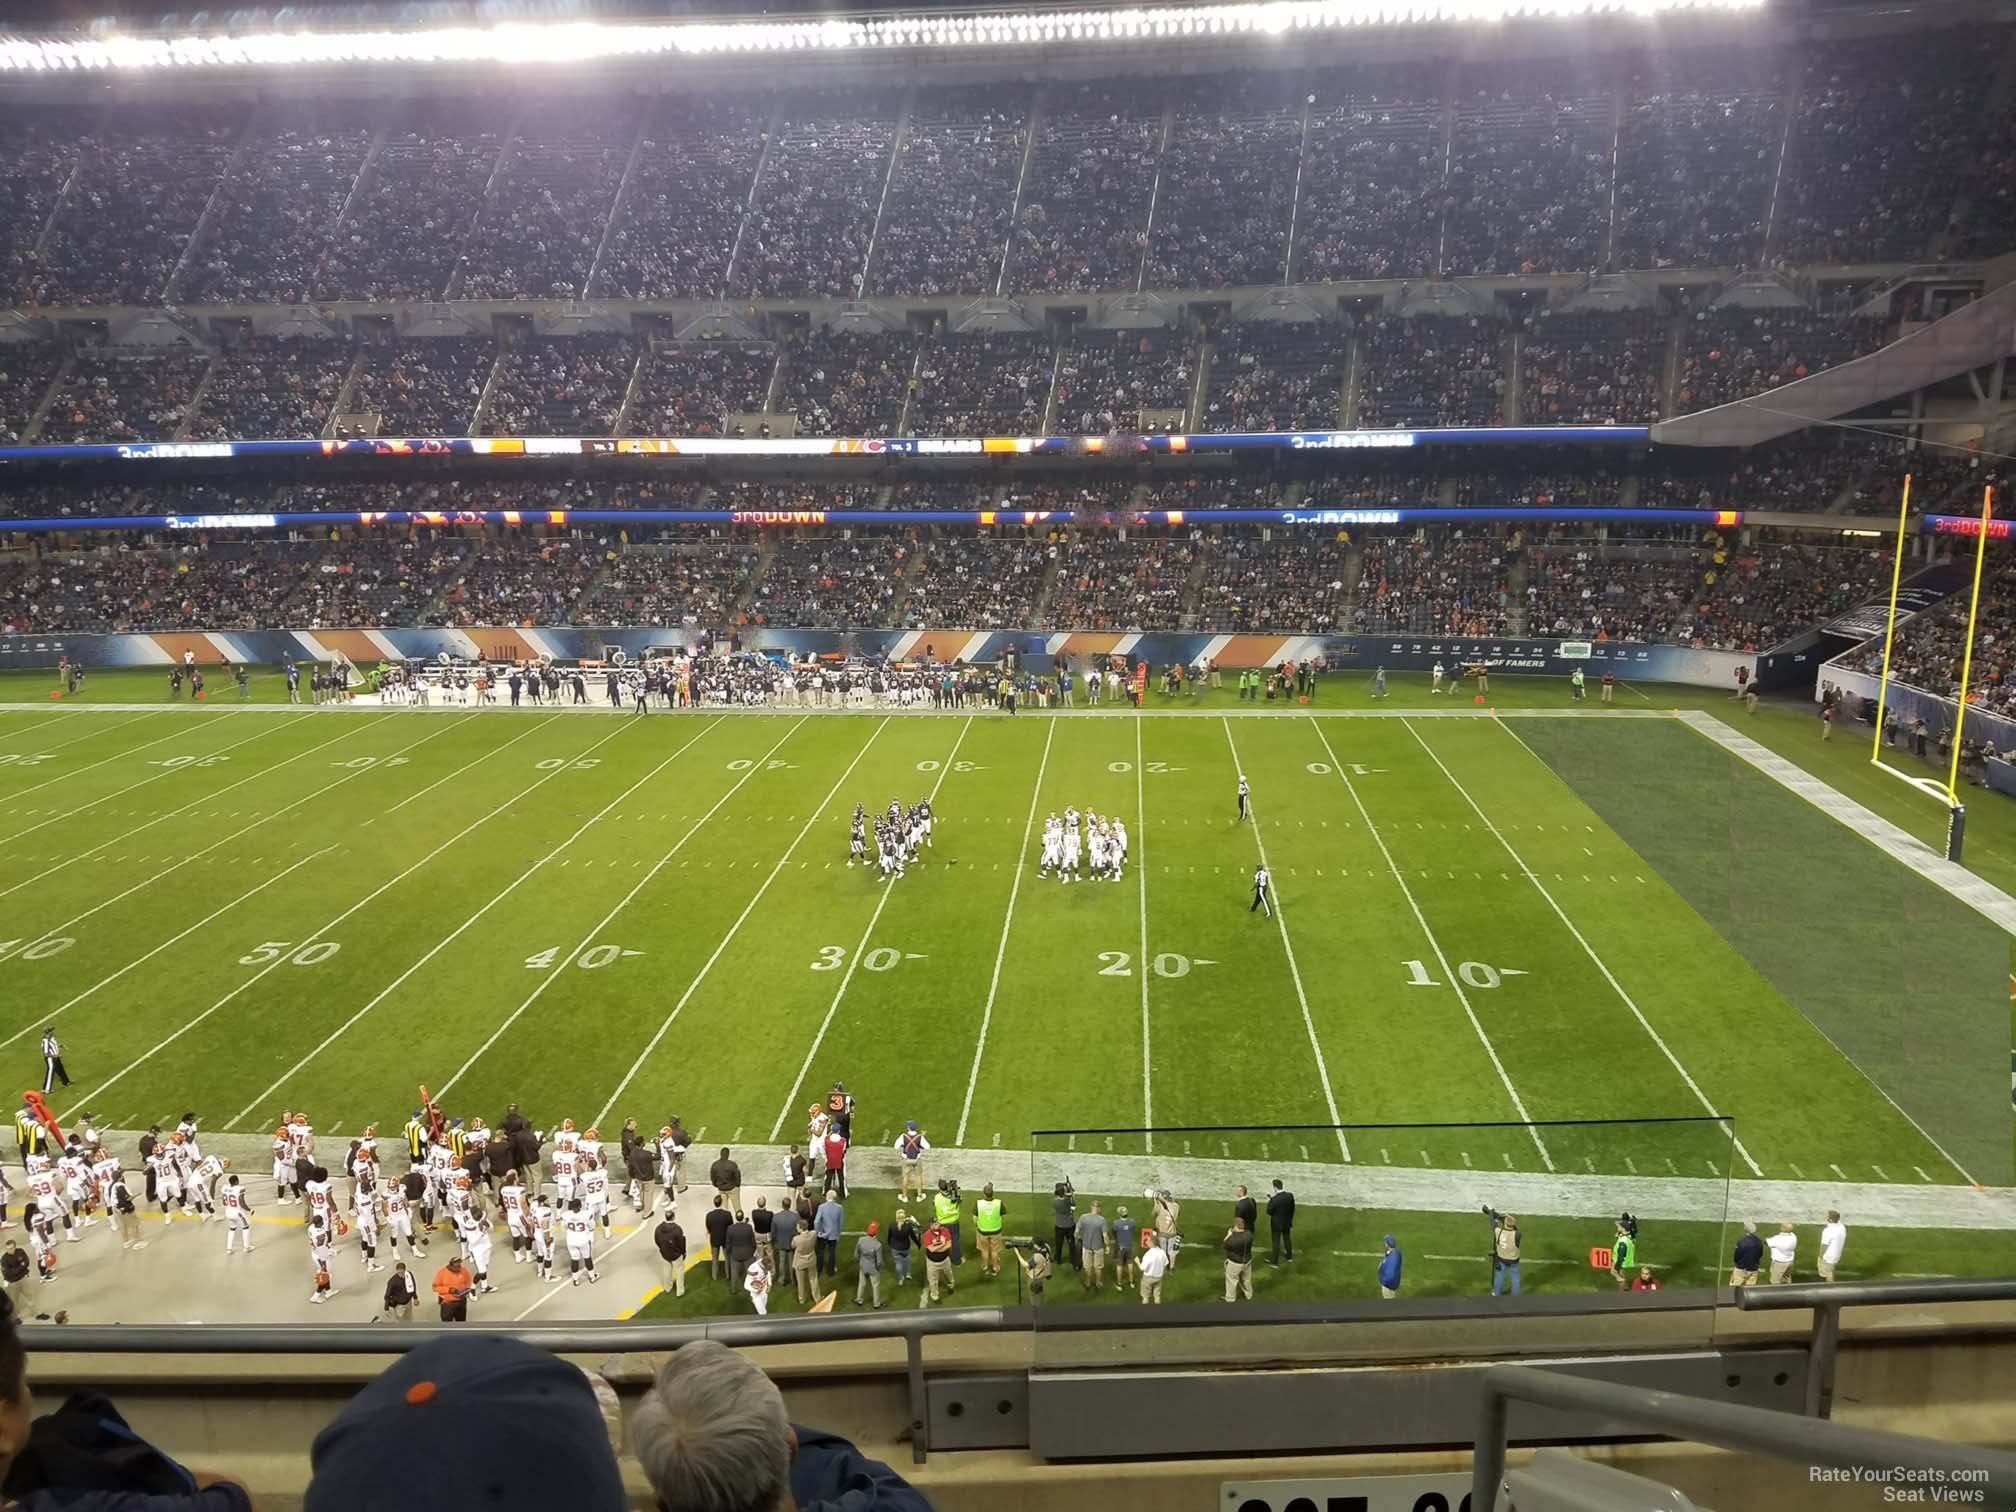 section 307, row 4 seat view  for football - soldier field